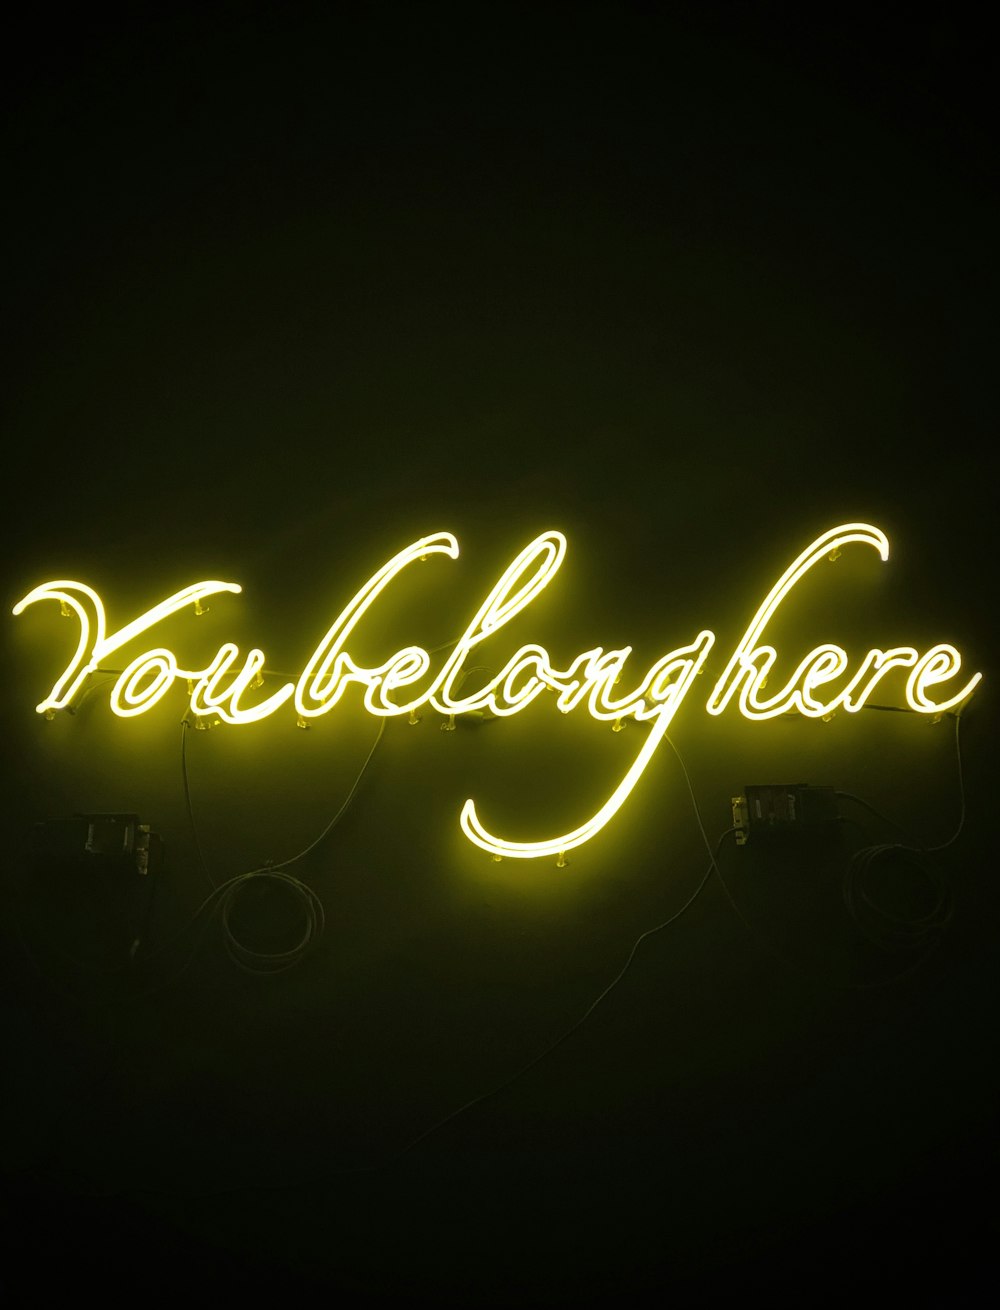 yellow Voubelonghere LED lights